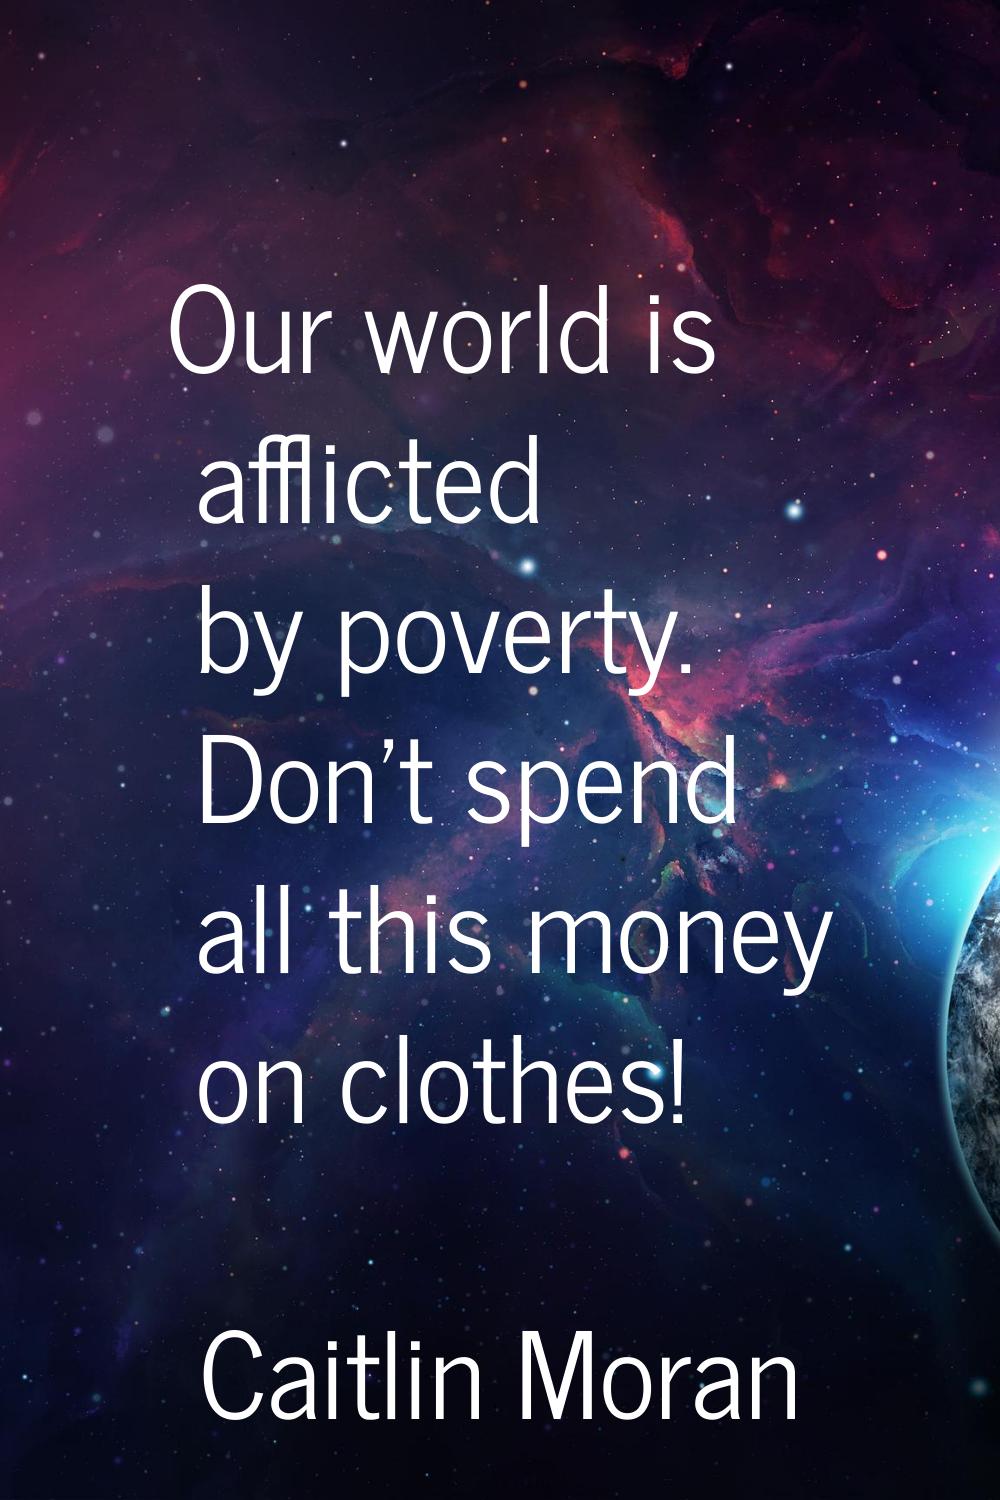 Our world is afflicted by poverty. Don't spend all this money on clothes!